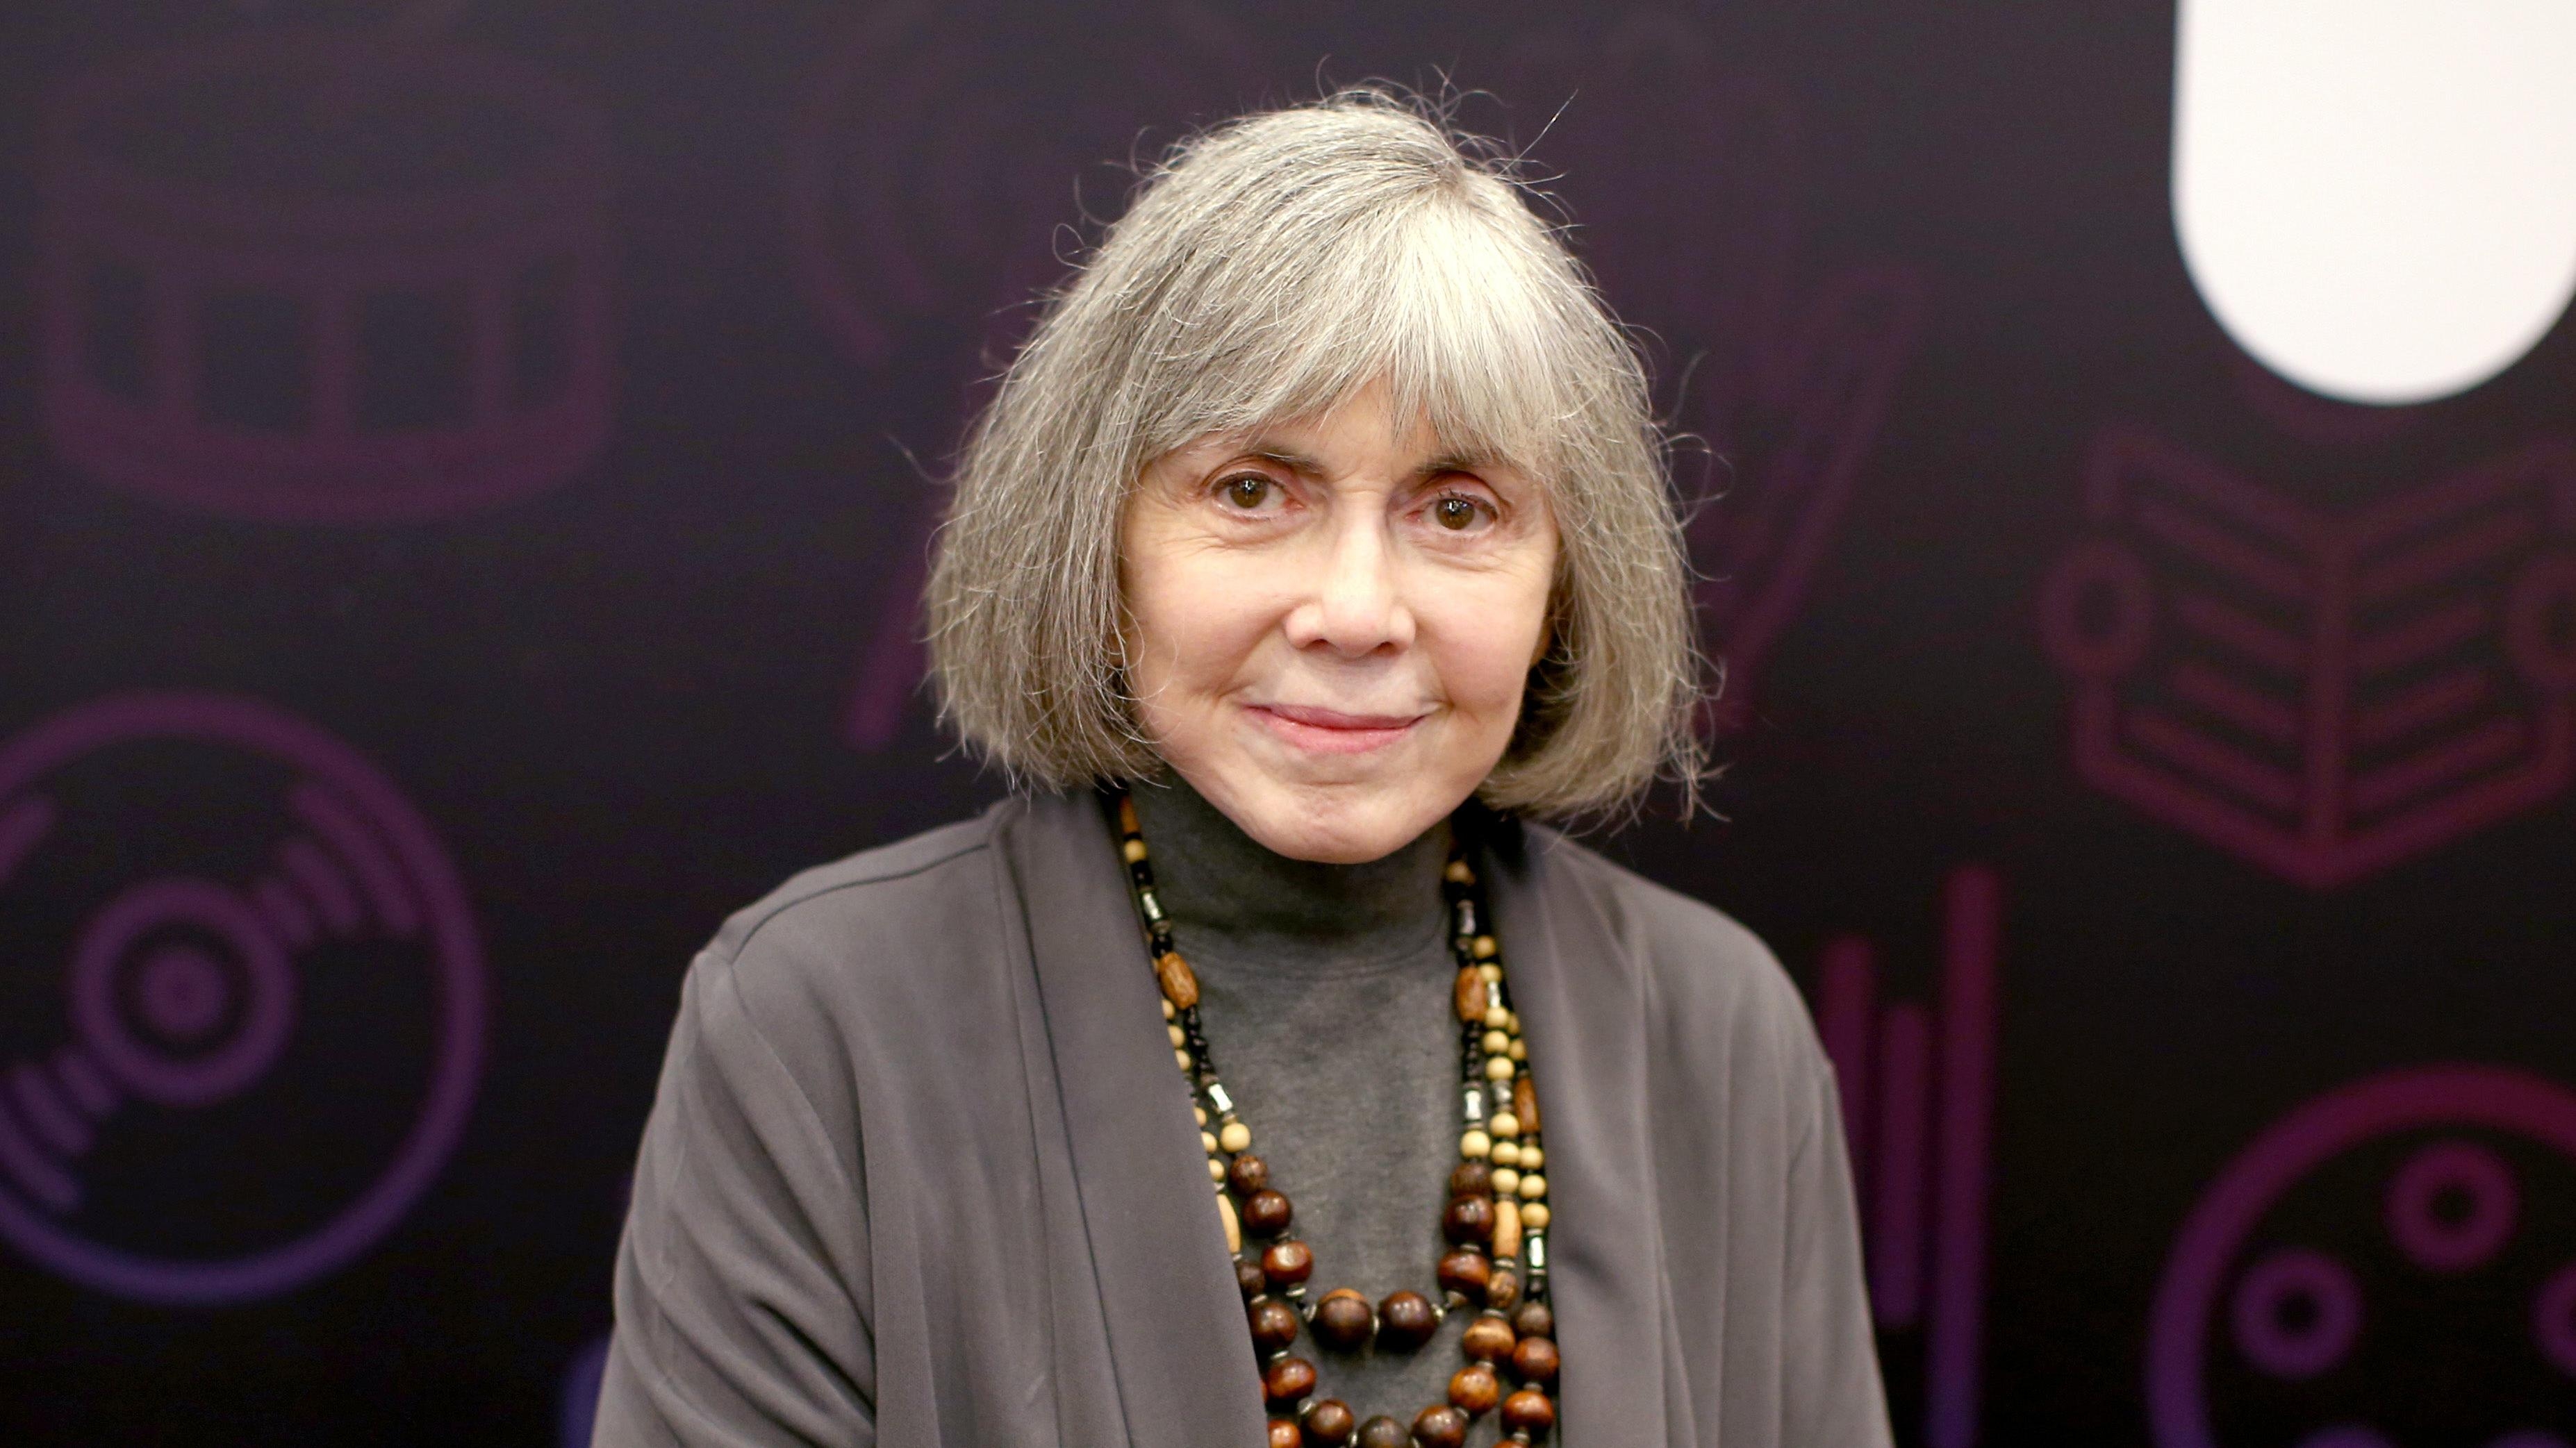 R.I.P. Interview With The Vampire writer Anne Rice